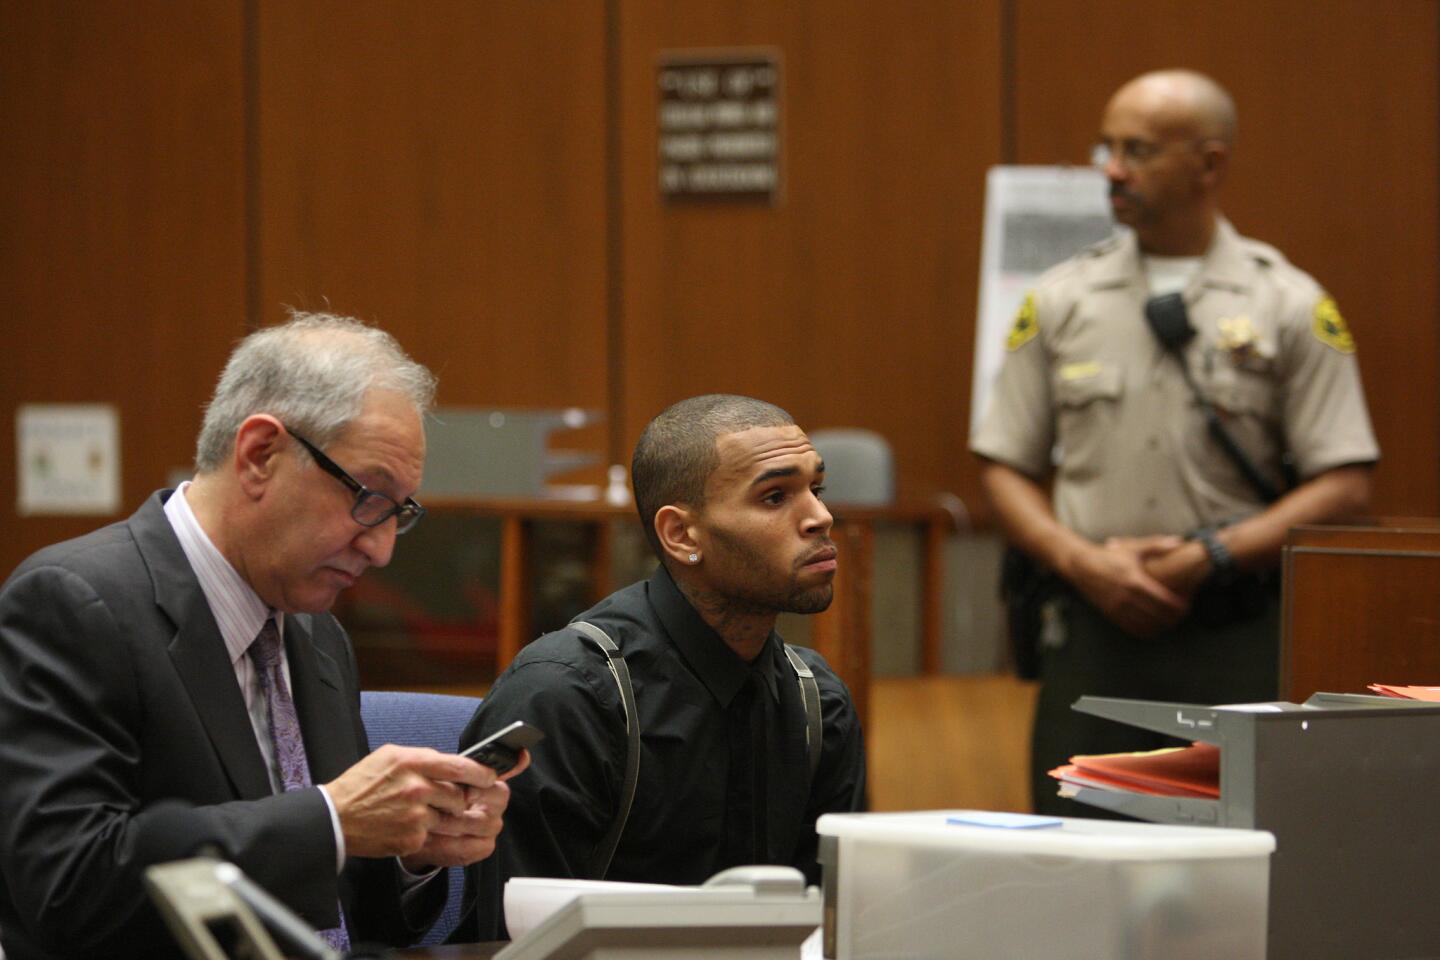 D.A. alleges Chris Brown failed to complete community service